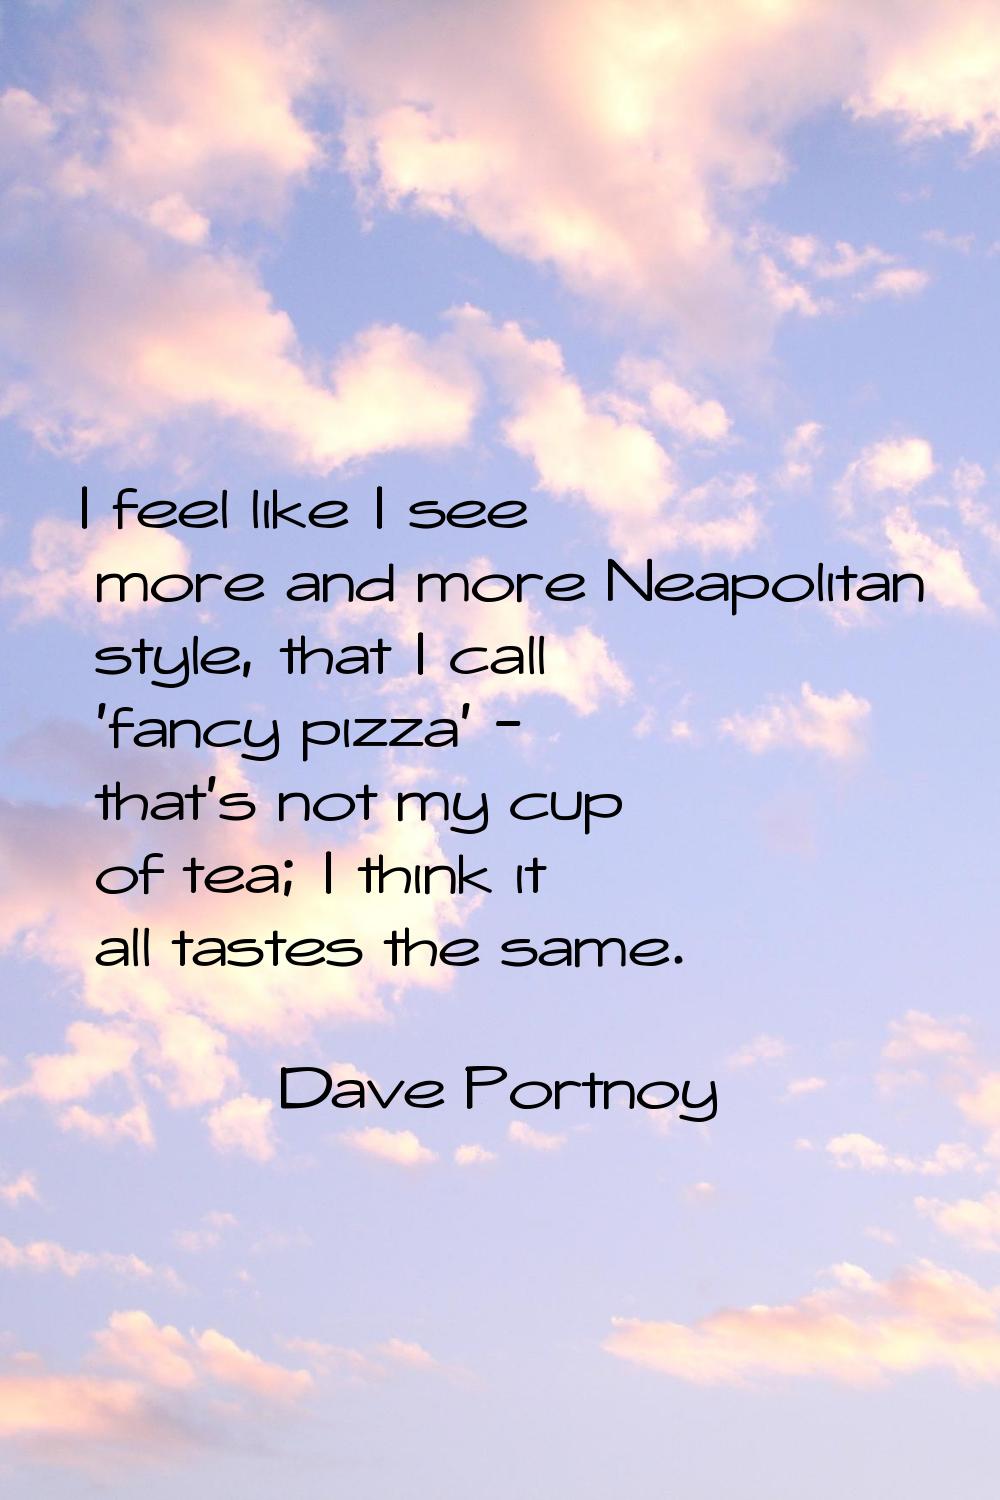 I feel like I see more and more Neapolitan style, that I call 'fancy pizza' - that's not my cup of 